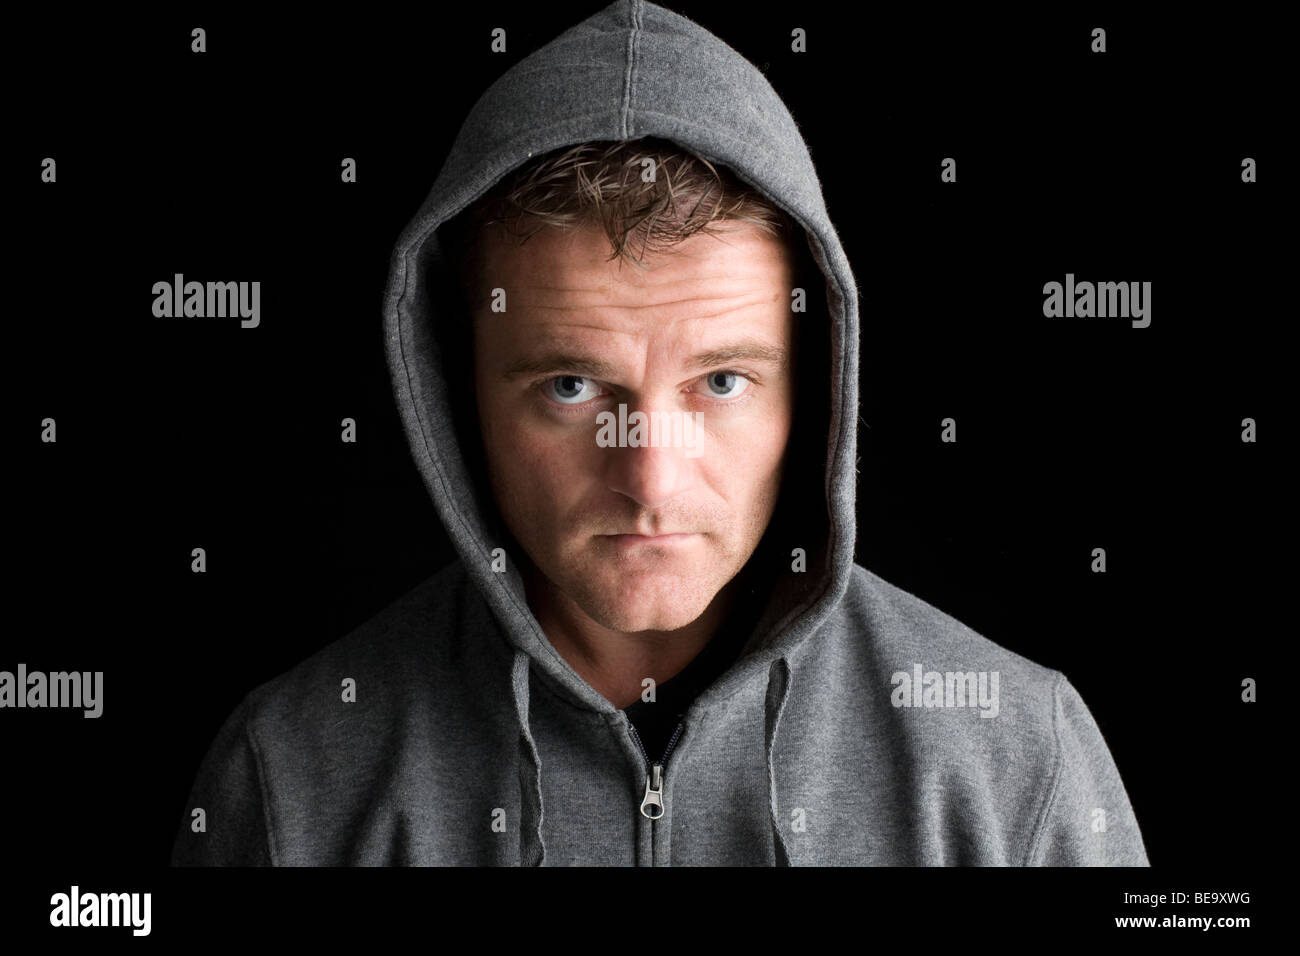 A hooded man looking at the camera Stock Photo